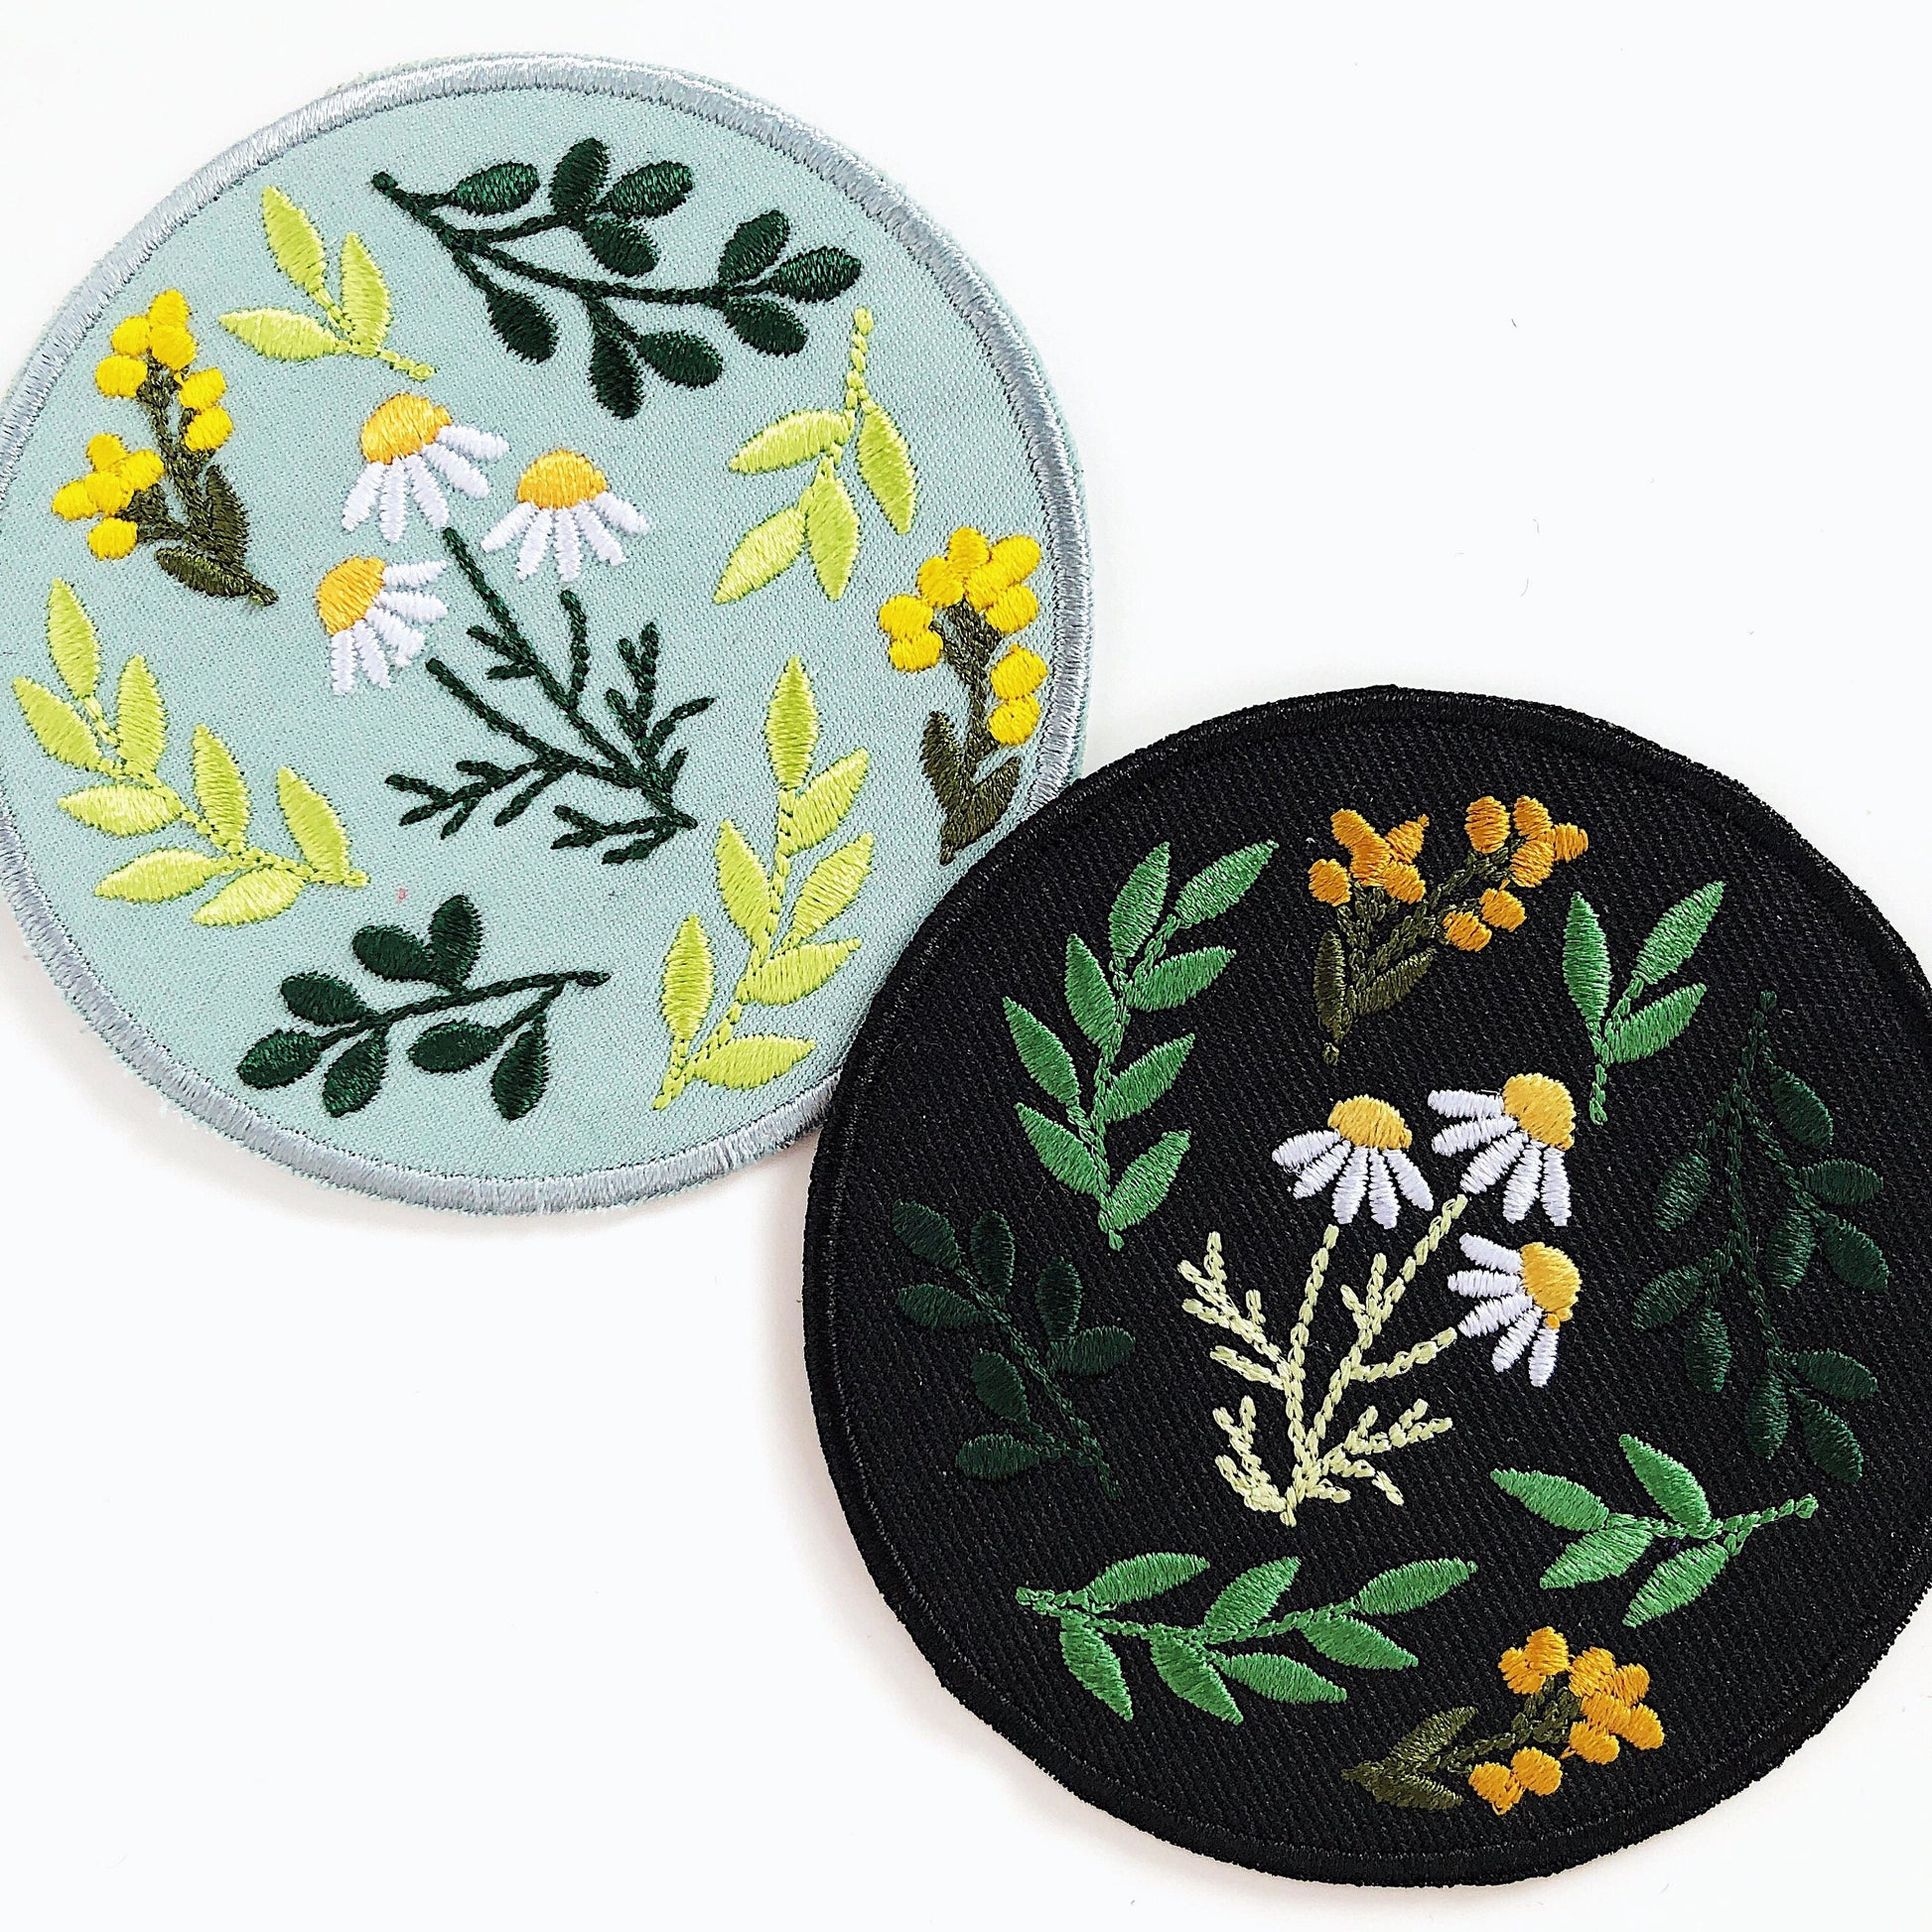 Iron-on flower patch, 3” Embroidered patch, Circle patch, Floral patch, wildflower embroidered patch, wildflower patch